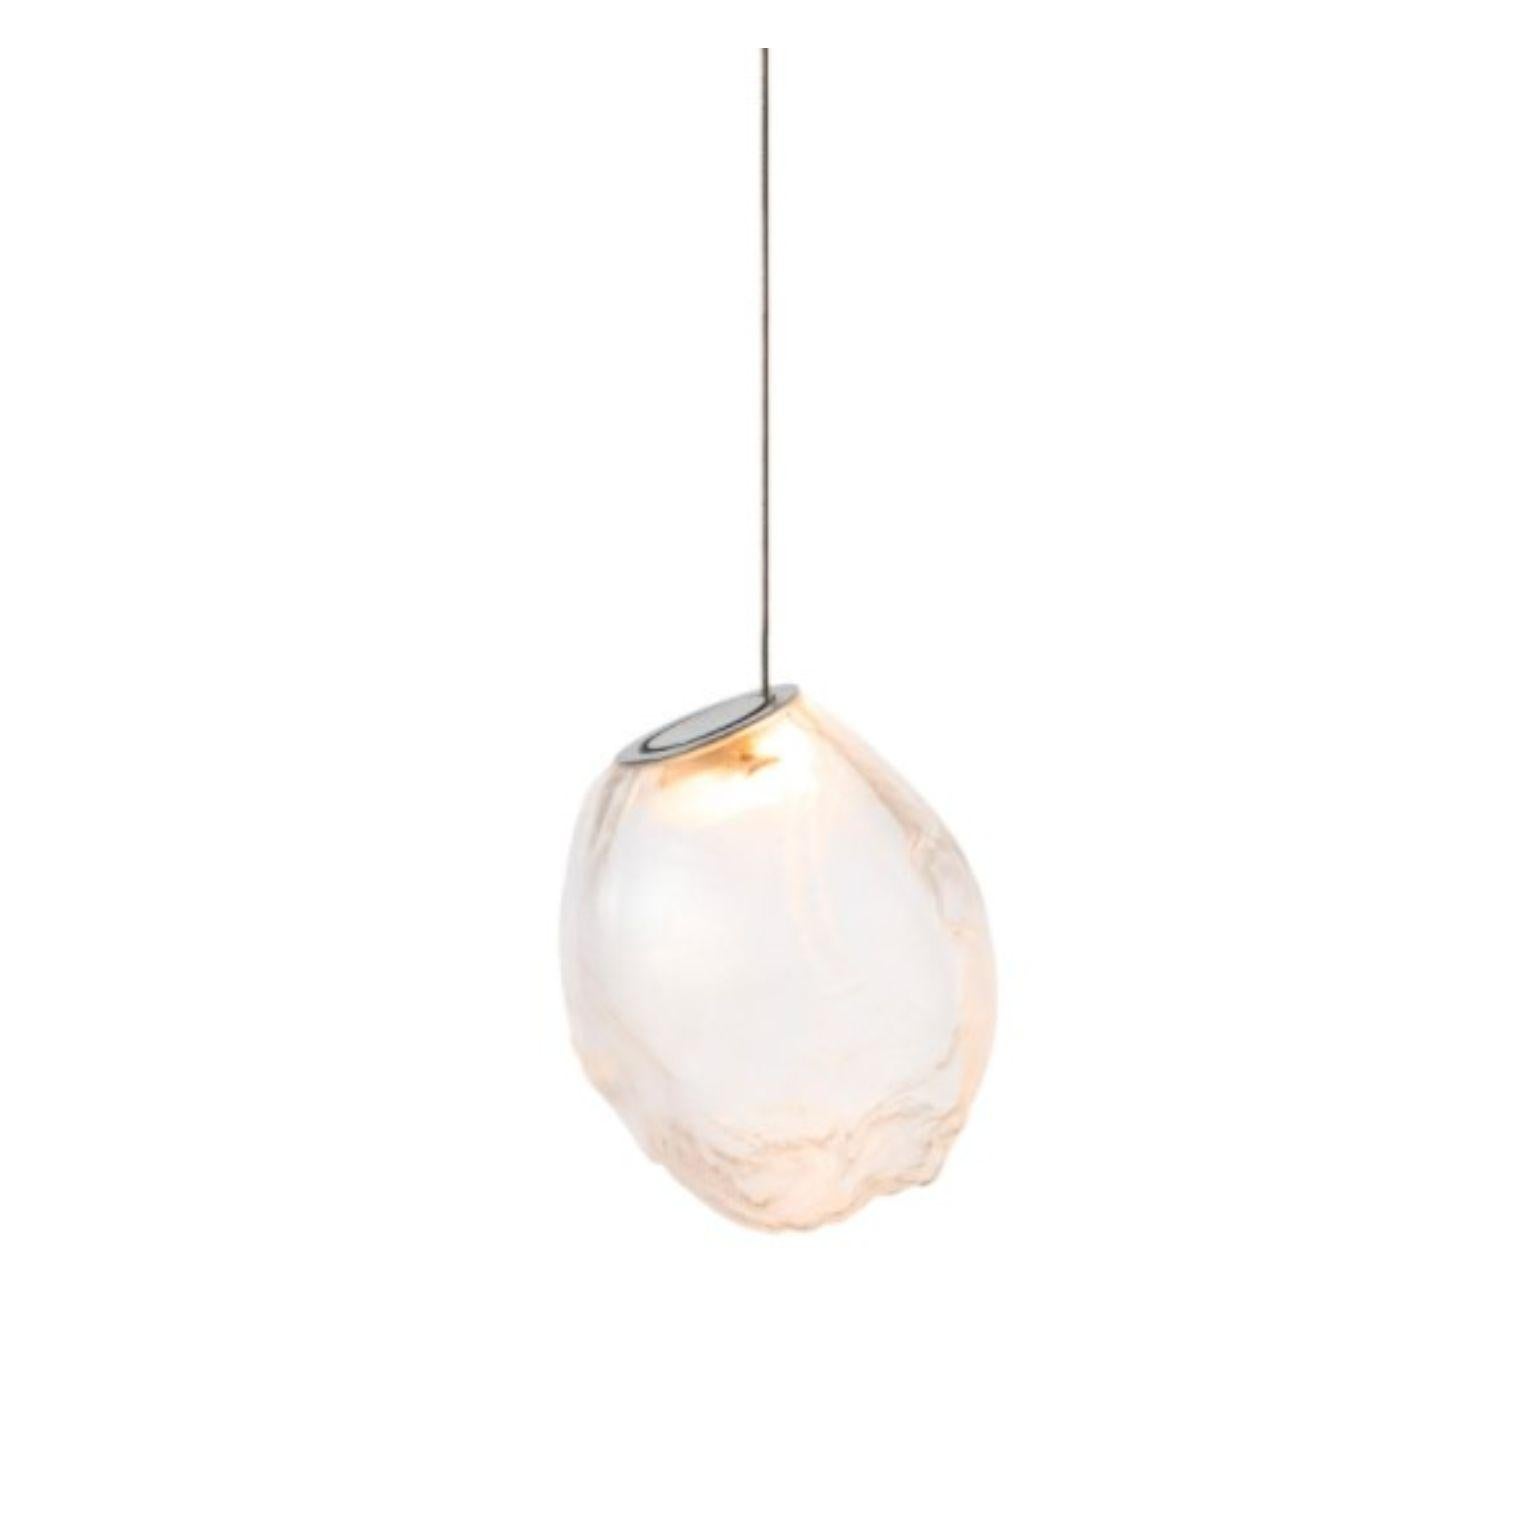 73.1 pendant by Bocci
Dimensions: D 11.6 x H 300 cm
Materials: brushed nickel round canopy
Weight: 2.7 kg
Also available in different dimensions and colours.
All our lamps can be wired according to each country. If sold to the USA it will be